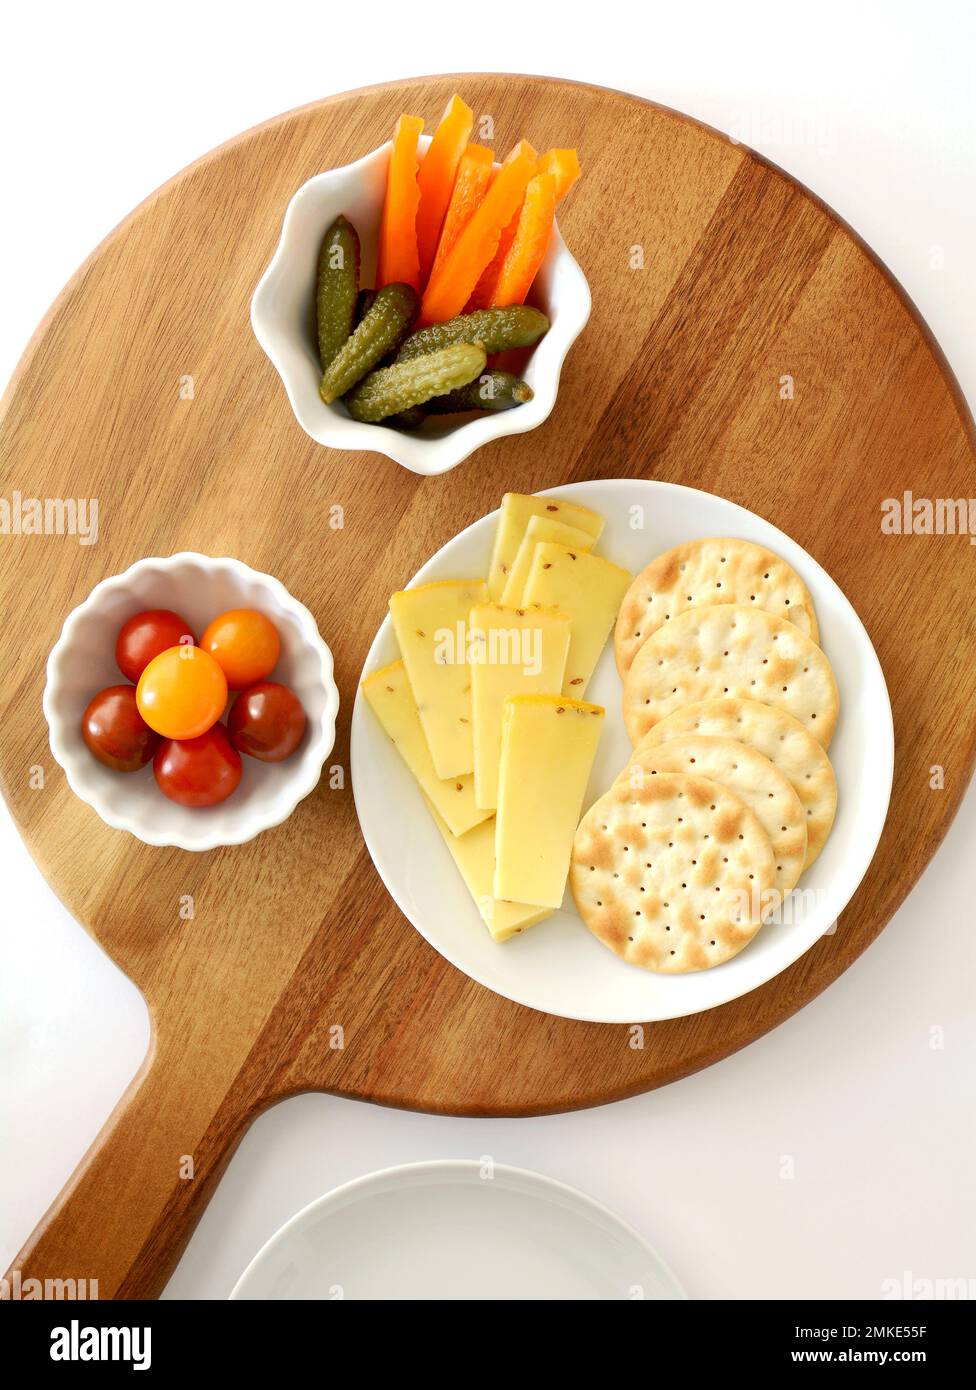 Dutch Gouda cheese slices and water crackers with cherry tomatoes,orange pepper strips and gherkins on round wooden serving board in flat lay composit Stock Photo